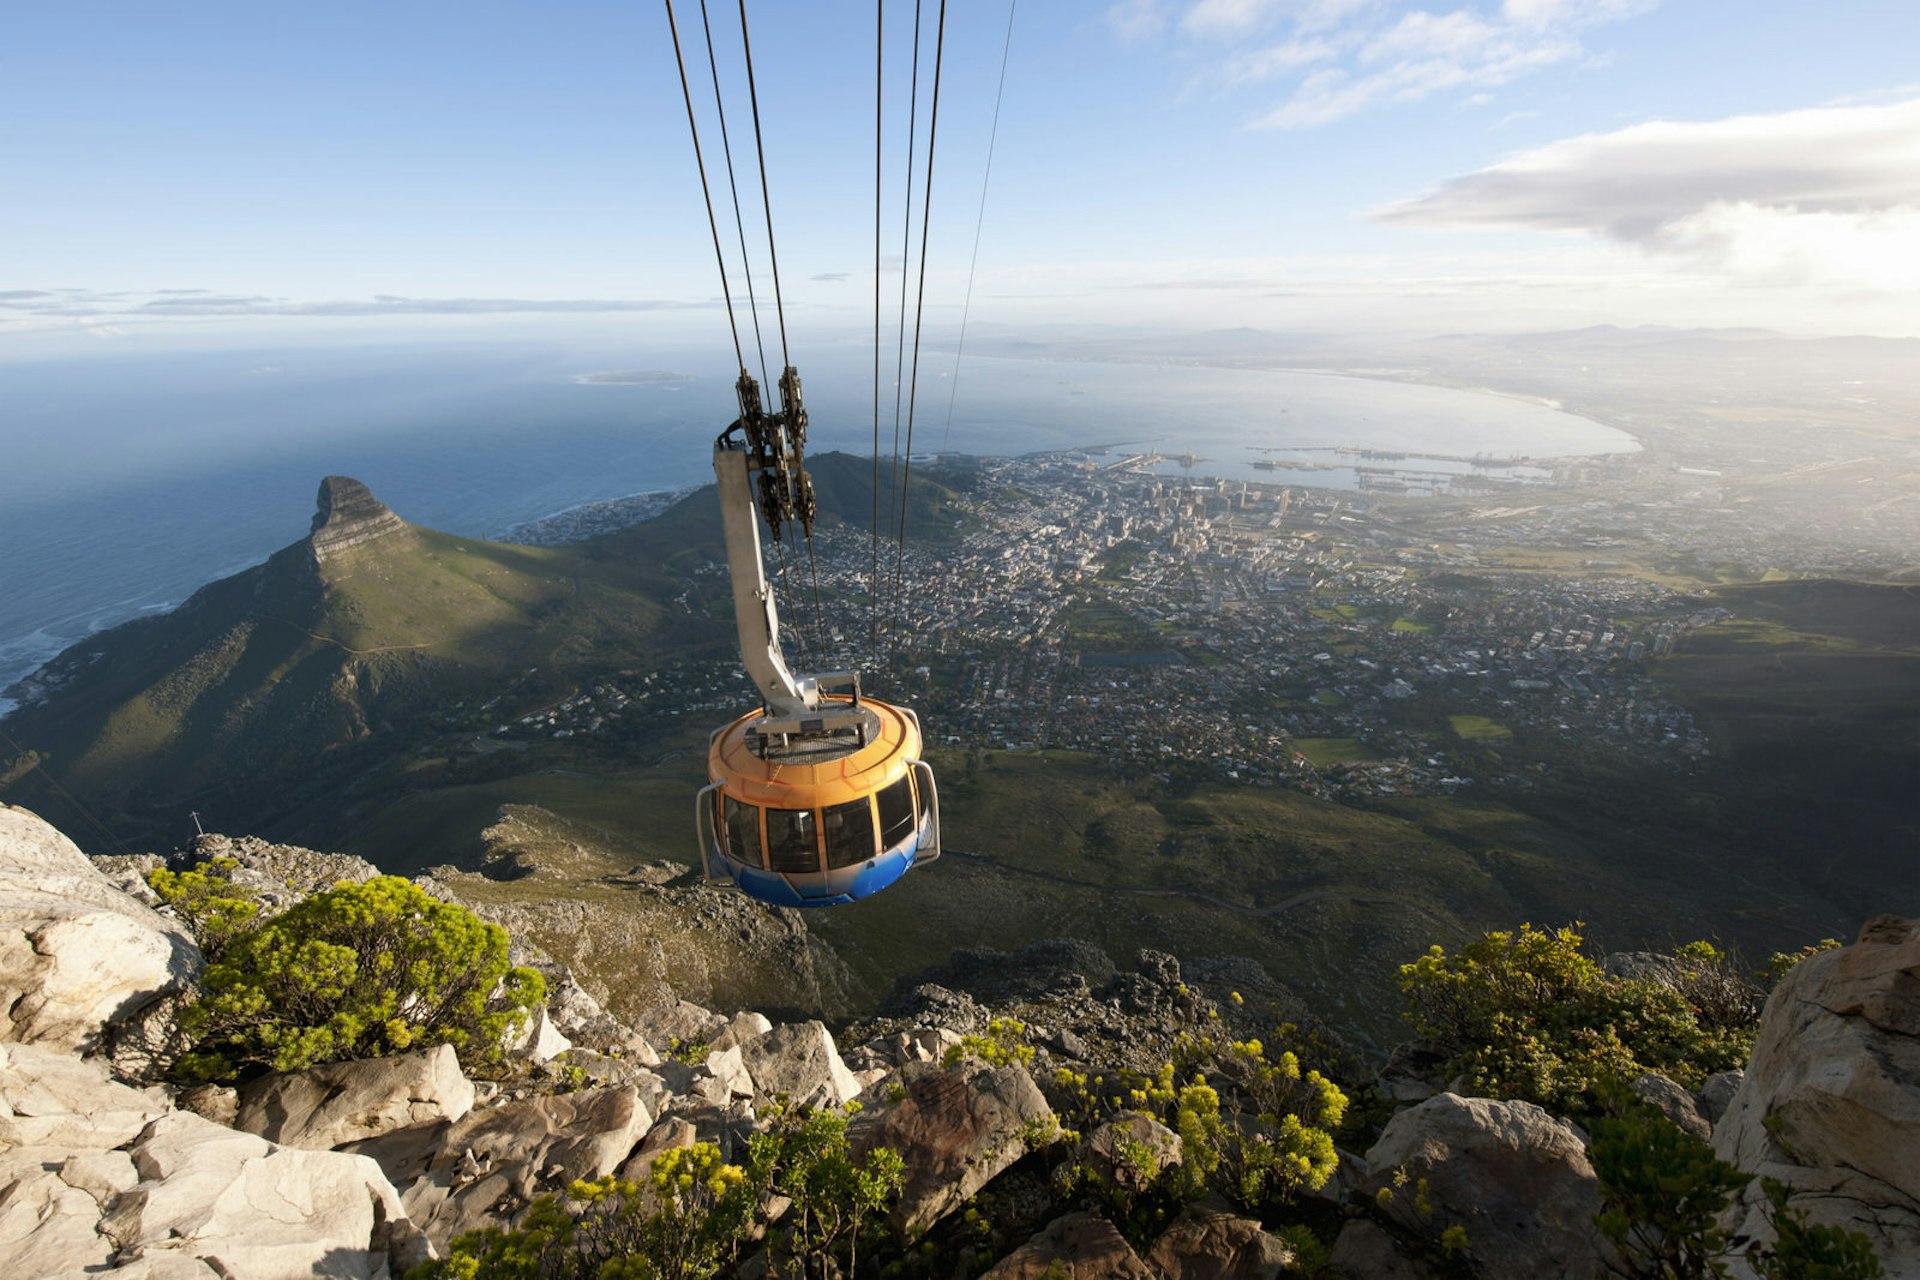 An elevated view of the Table Mountain Cable Car descending from the top of Table Mountain, Cape Town, Western Cape, South Africa